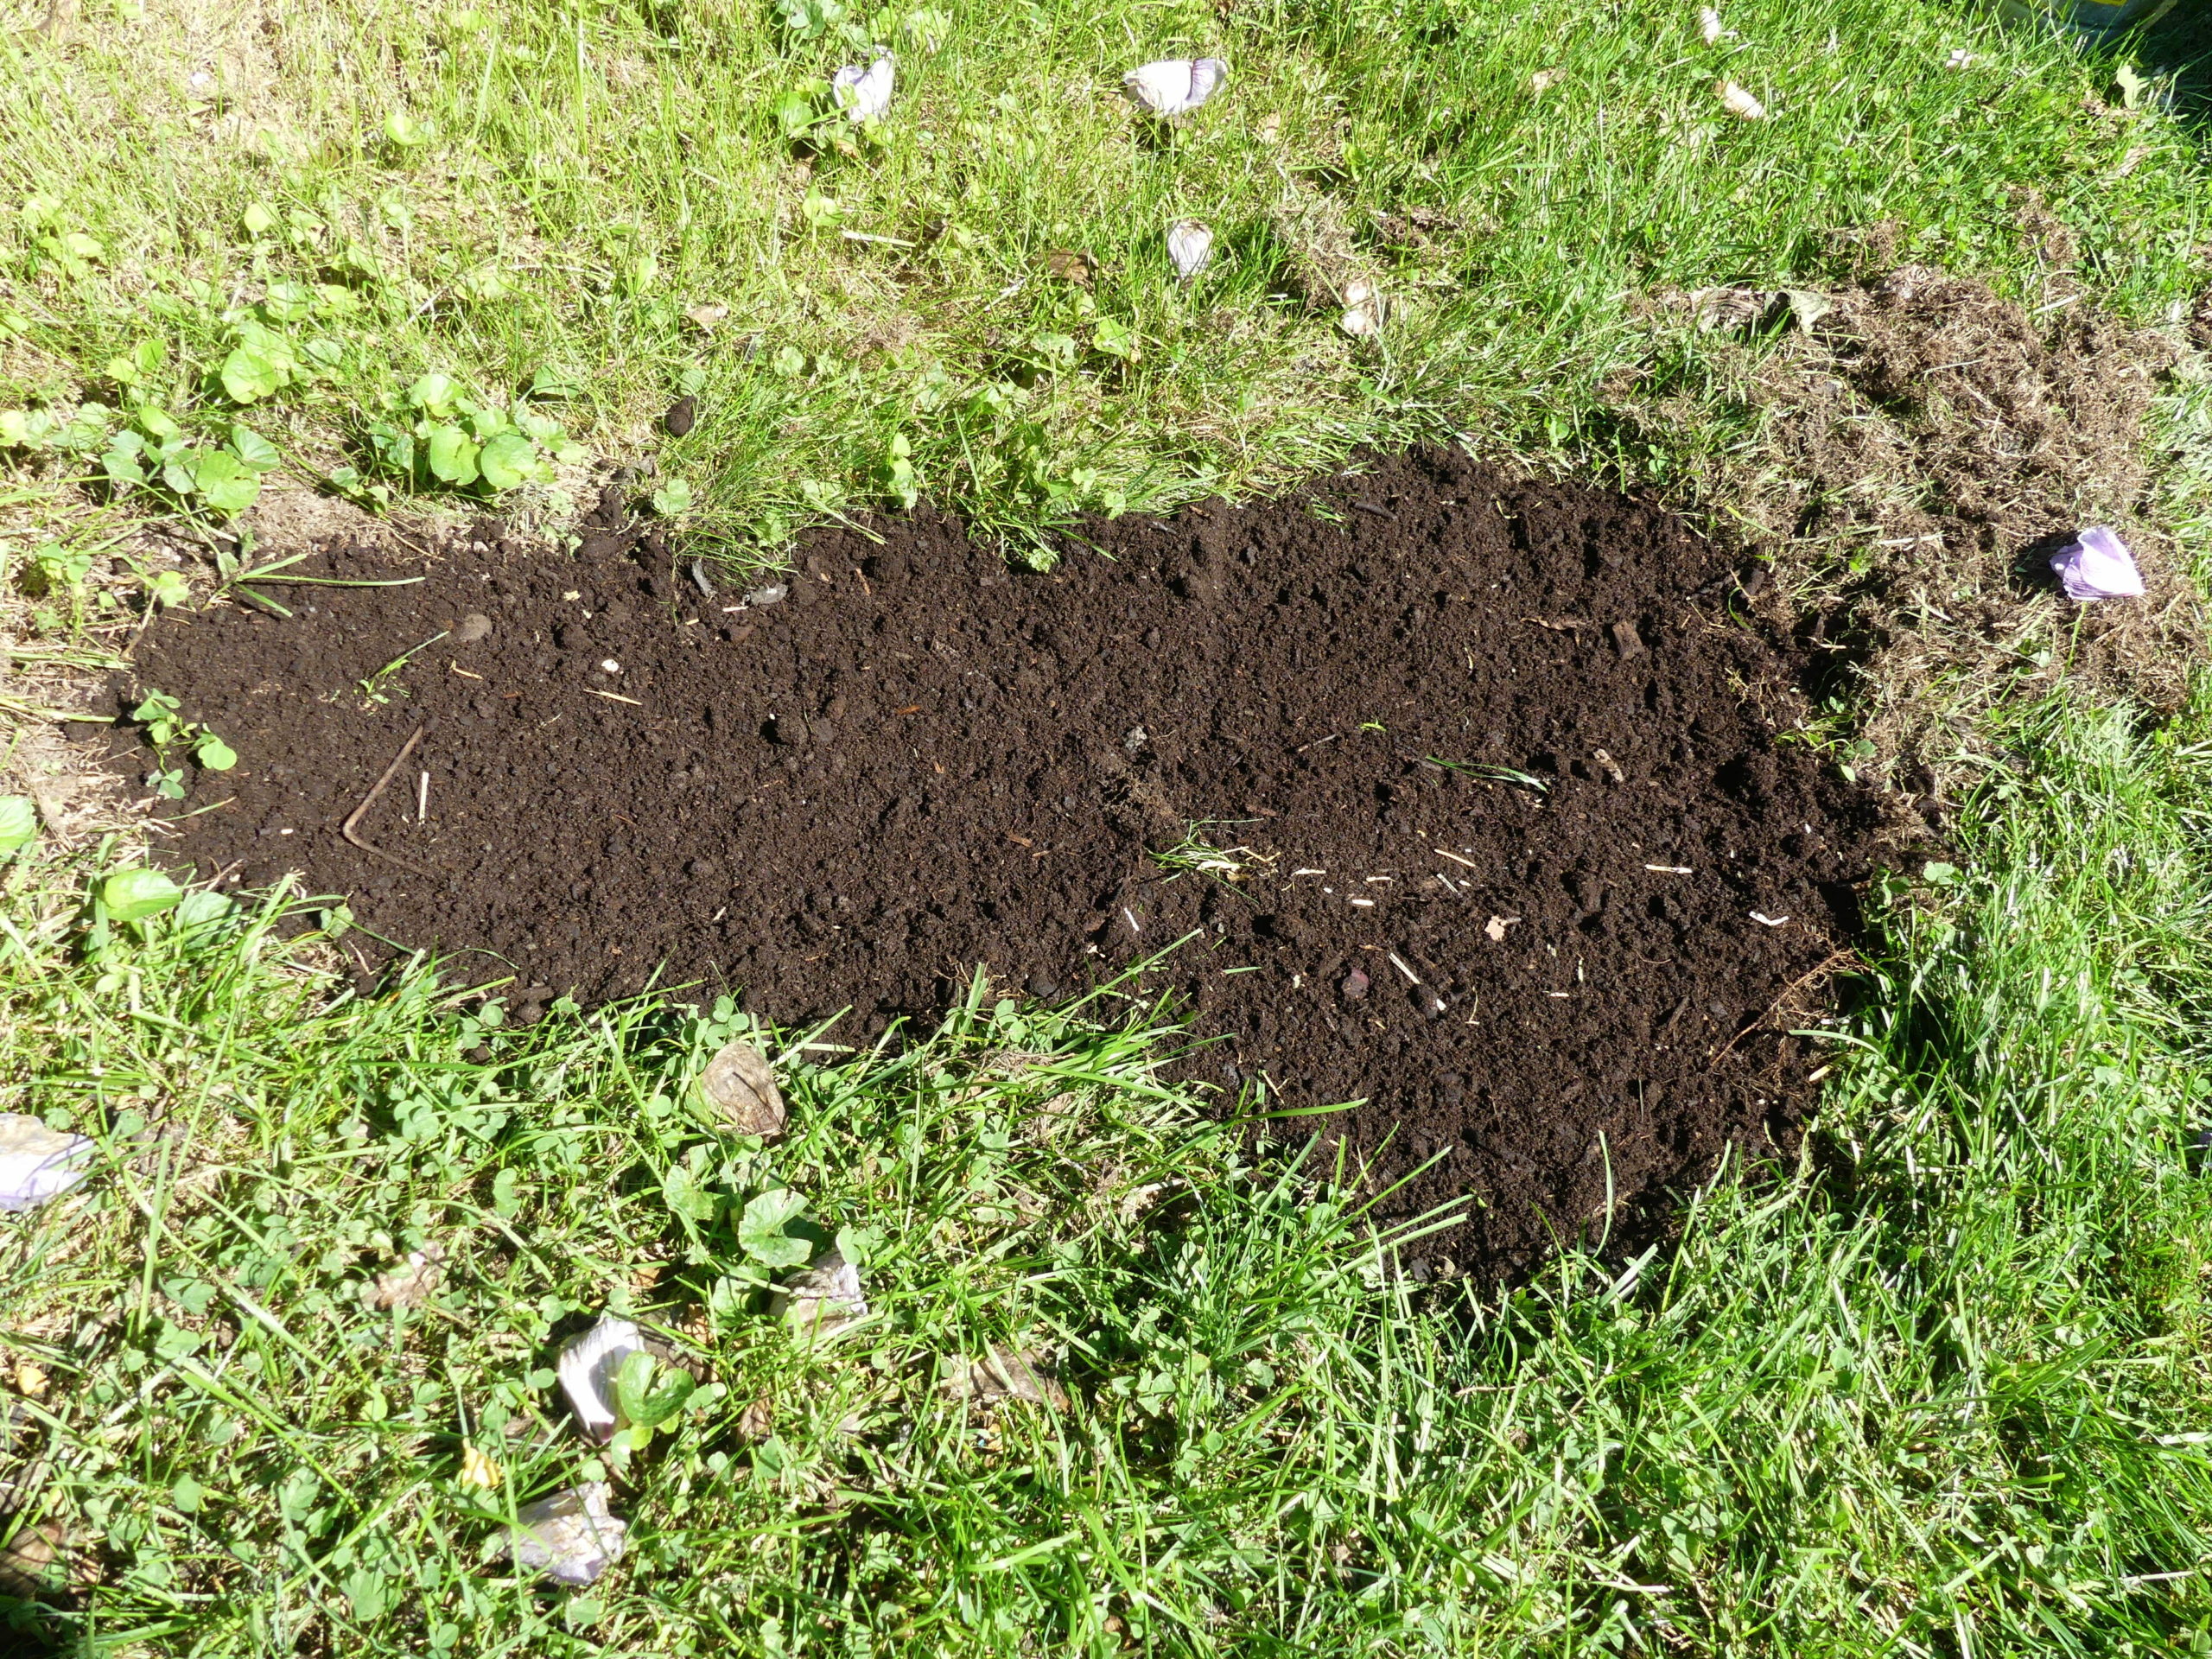 Once raked clear with a small fan rake (debris to the right) the area to be seeded is filled and leveled with the property soil mix and leveled with  a tine rake.